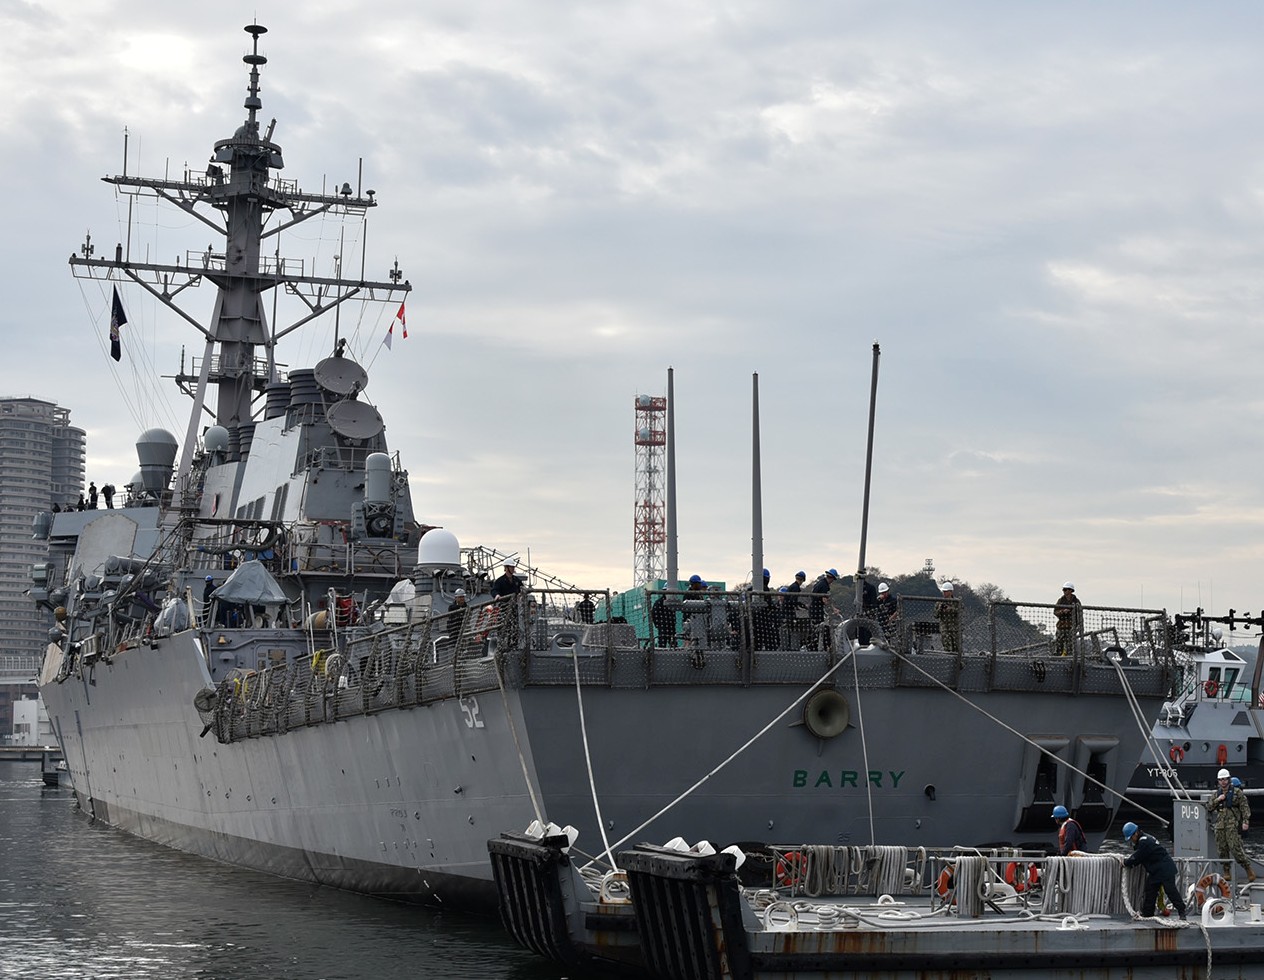 ddg-52 uss barry arleigh burke class guided missile destroyer us navy 107